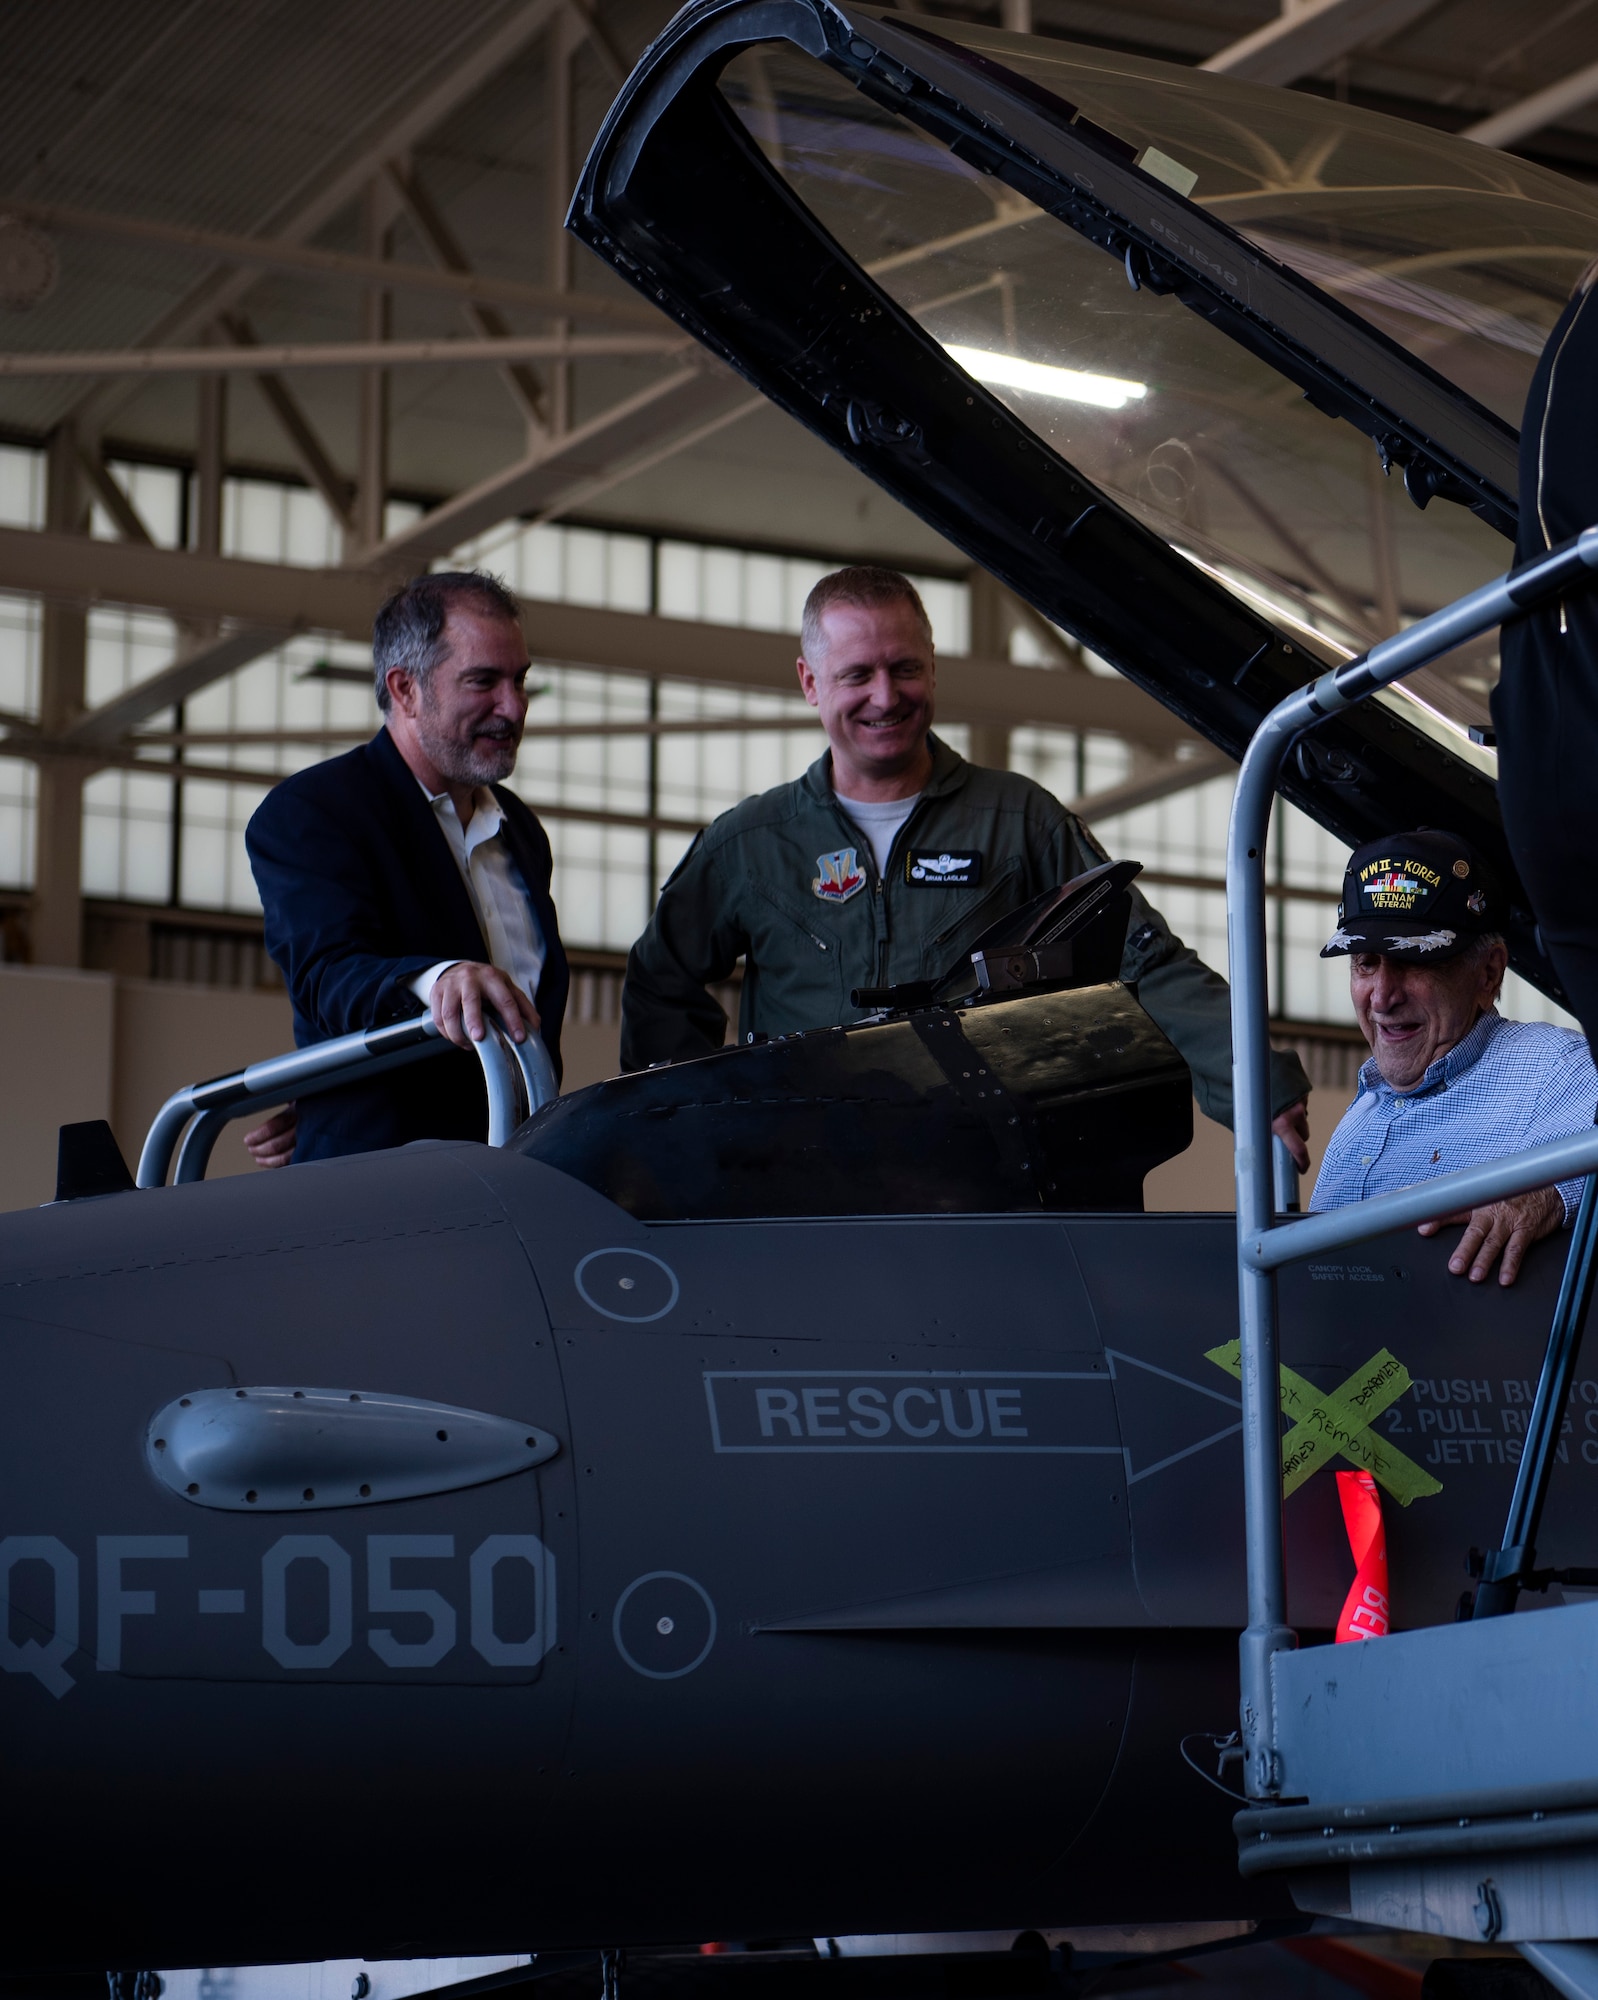 Dr. Daniel Daube, left, U.S. Air Force Col. Brian Laidlaw, 325th Fighter Wing commander, center, and Retired U.S. Air Force Lt. Col. Daniel Daube, right, visited the 325th Fighter Wing and viewed a QF-16 Fighting Falcon at Tyndall Air Force Base, Florida, Nov. 27, 2019. Daube was a veteran of World War II, Korean, and Vietnam war, flying multiple air frames and combat missions. Daube visited a static QF-16 Fighting Falcon and sat in the cockpit for the first time in many years. (U.S. Air Force photo by Staff Sgt. Magen M. Reeves)